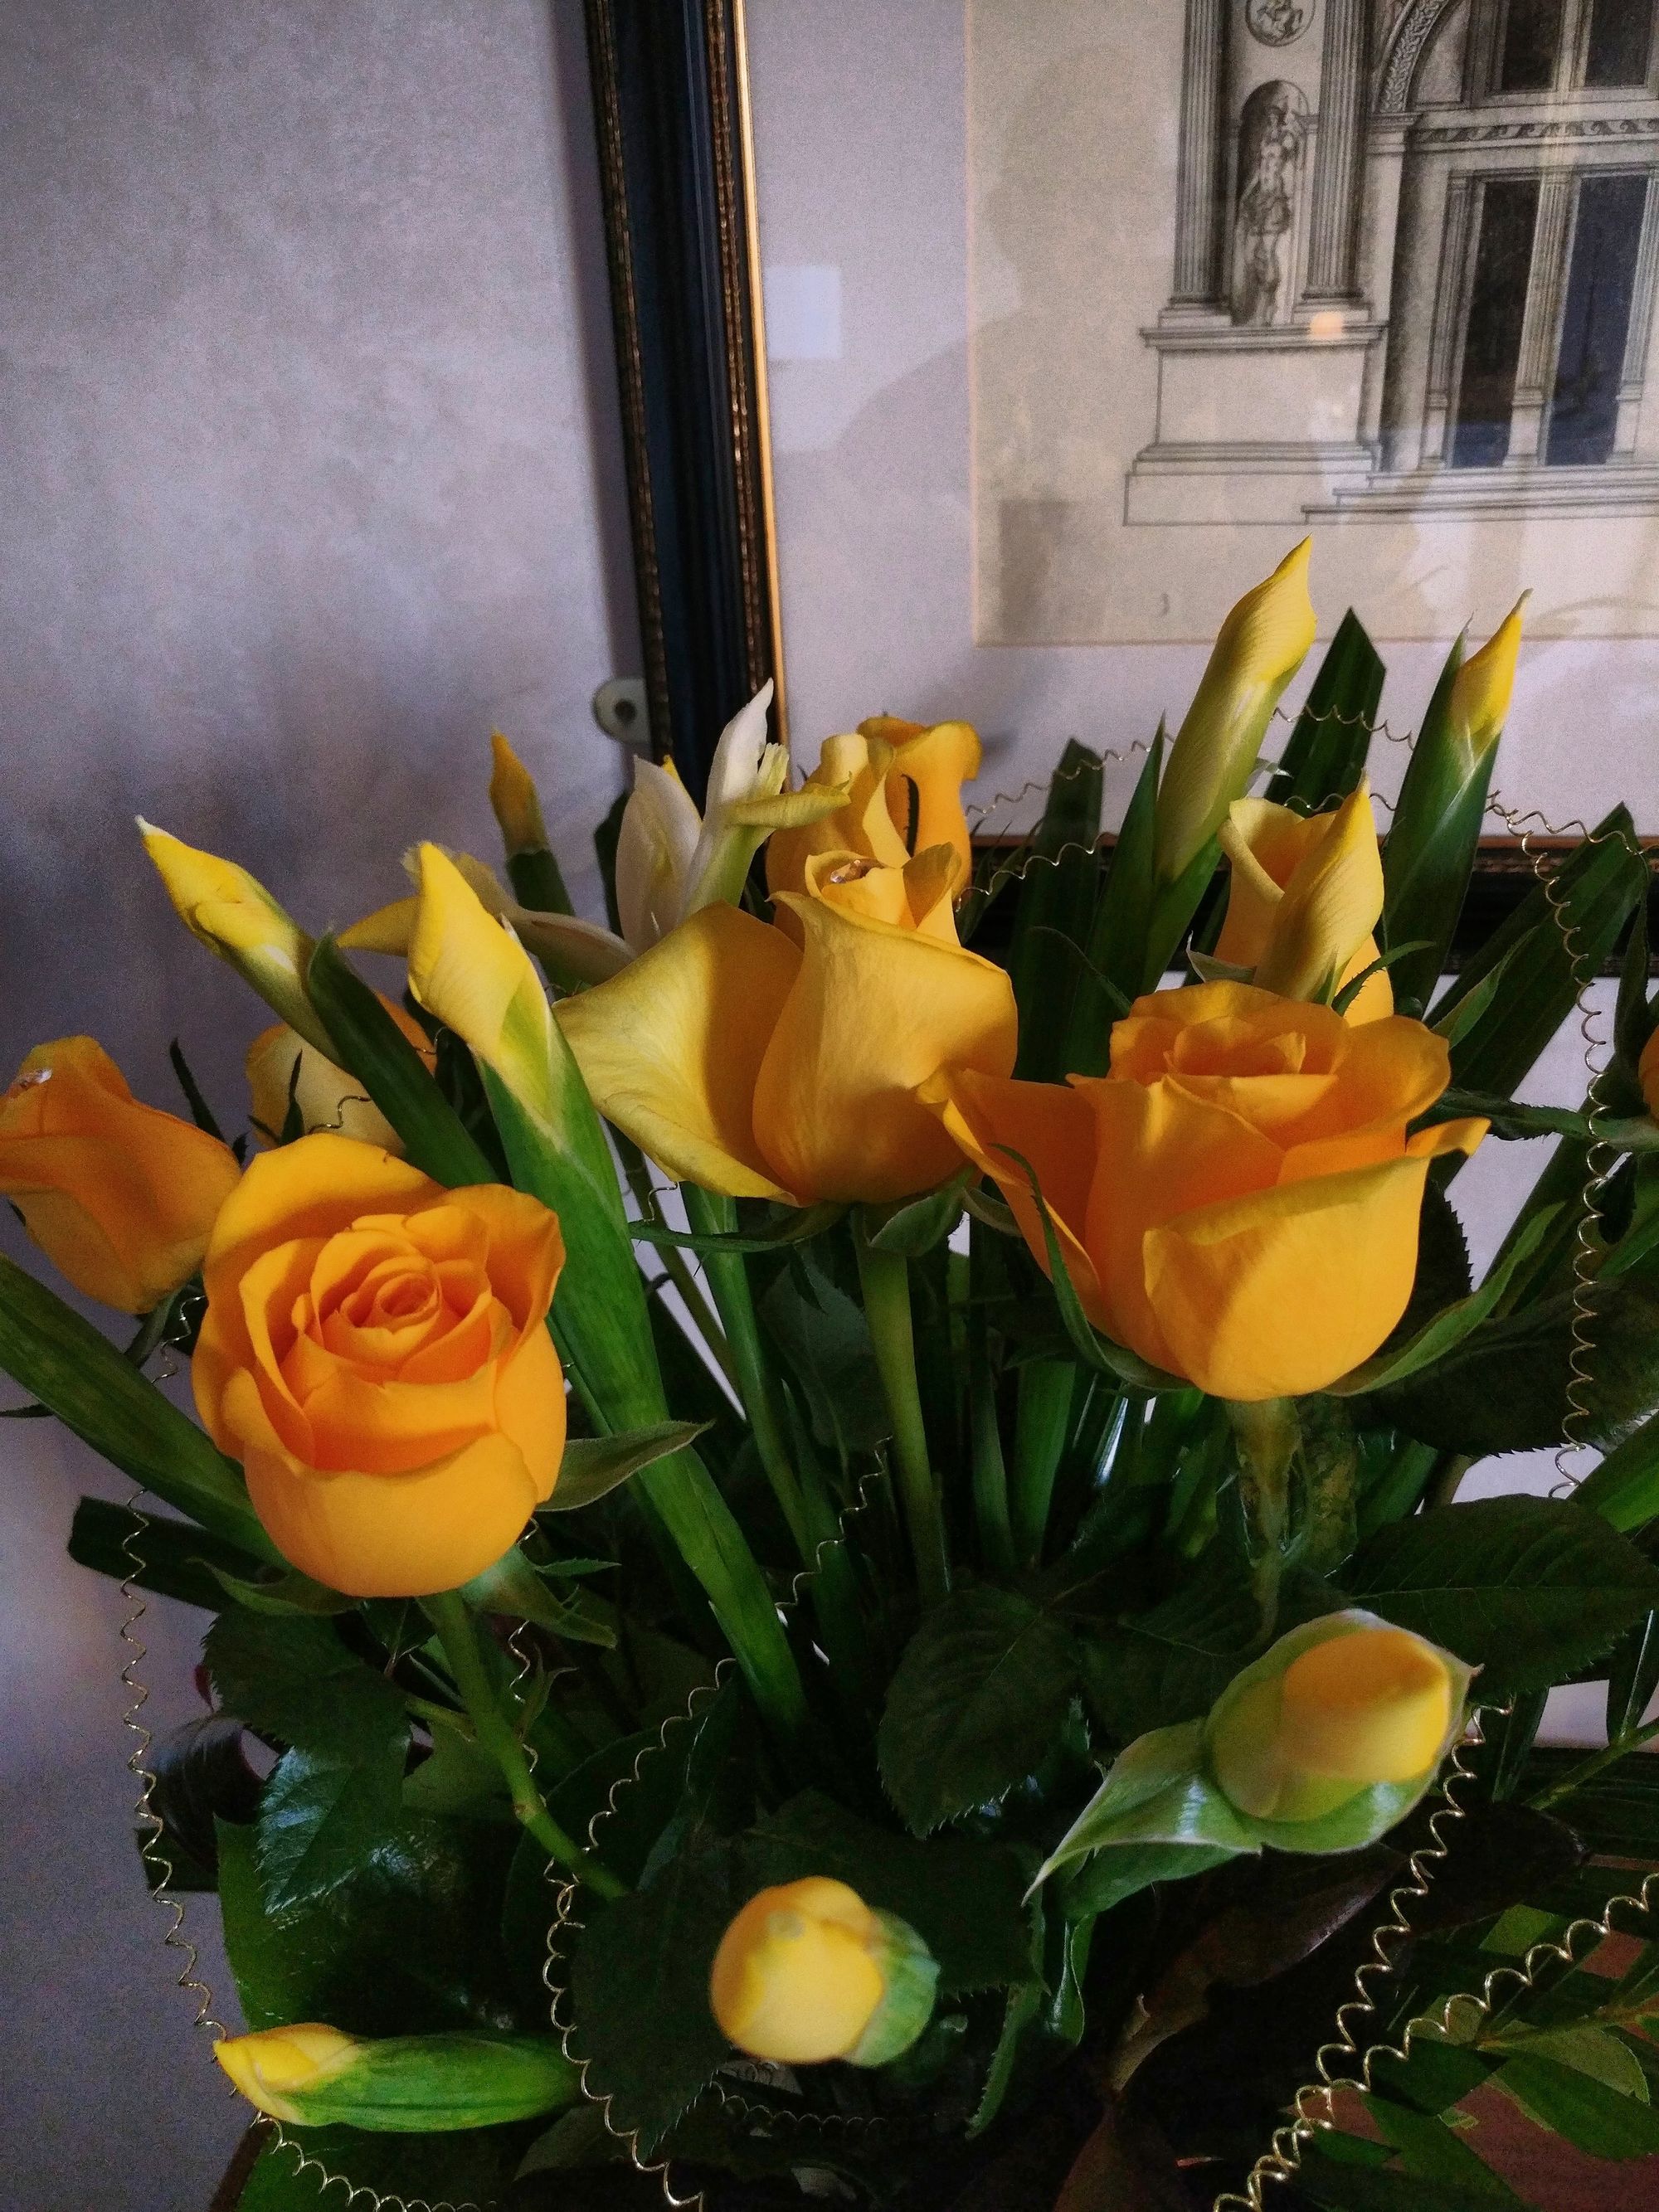 Yellow roses are the promise of new beginnings